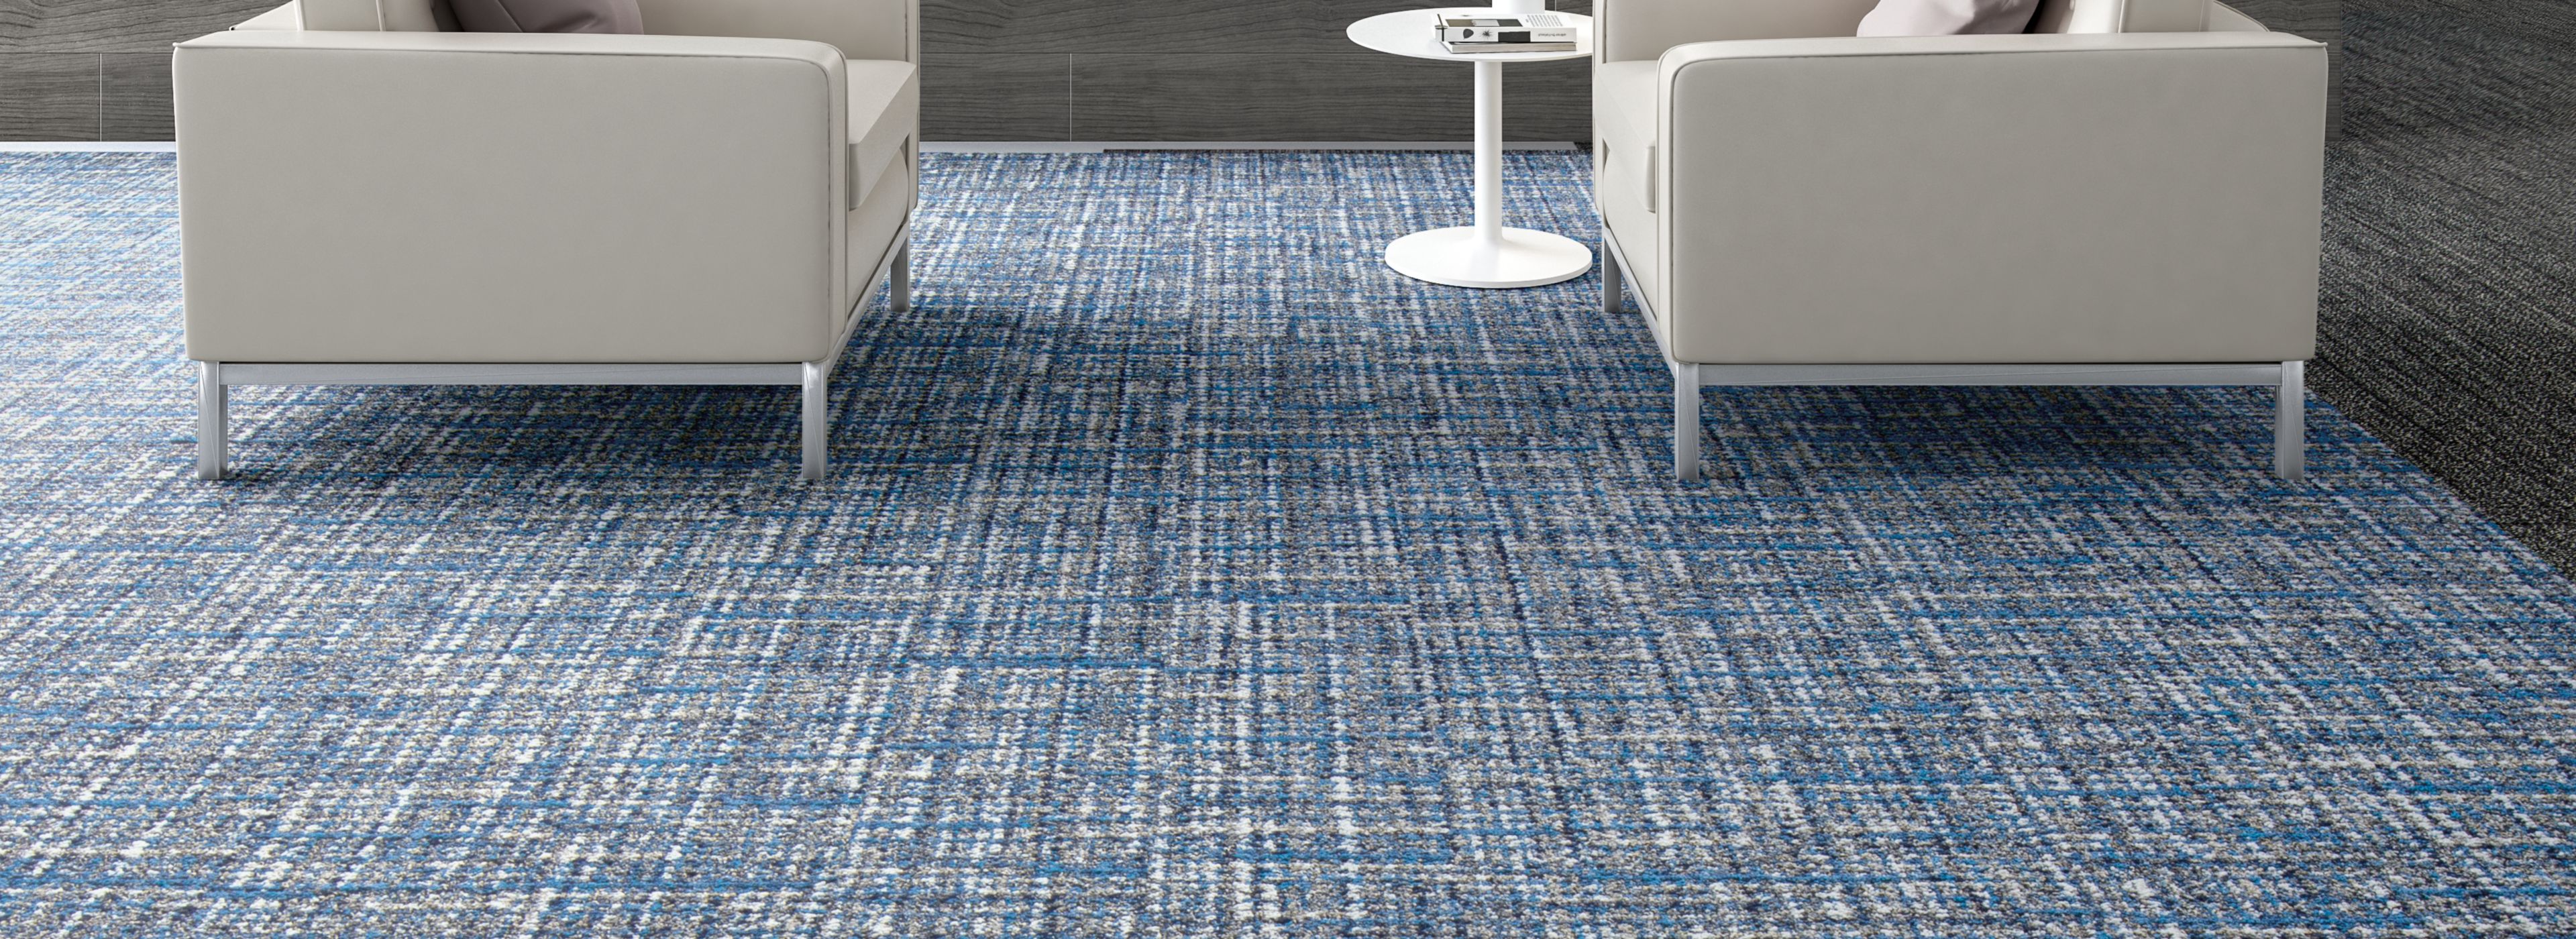 Interface WW895 plank carpet tile in lobby area with couches and side table  afbeeldingnummer 1